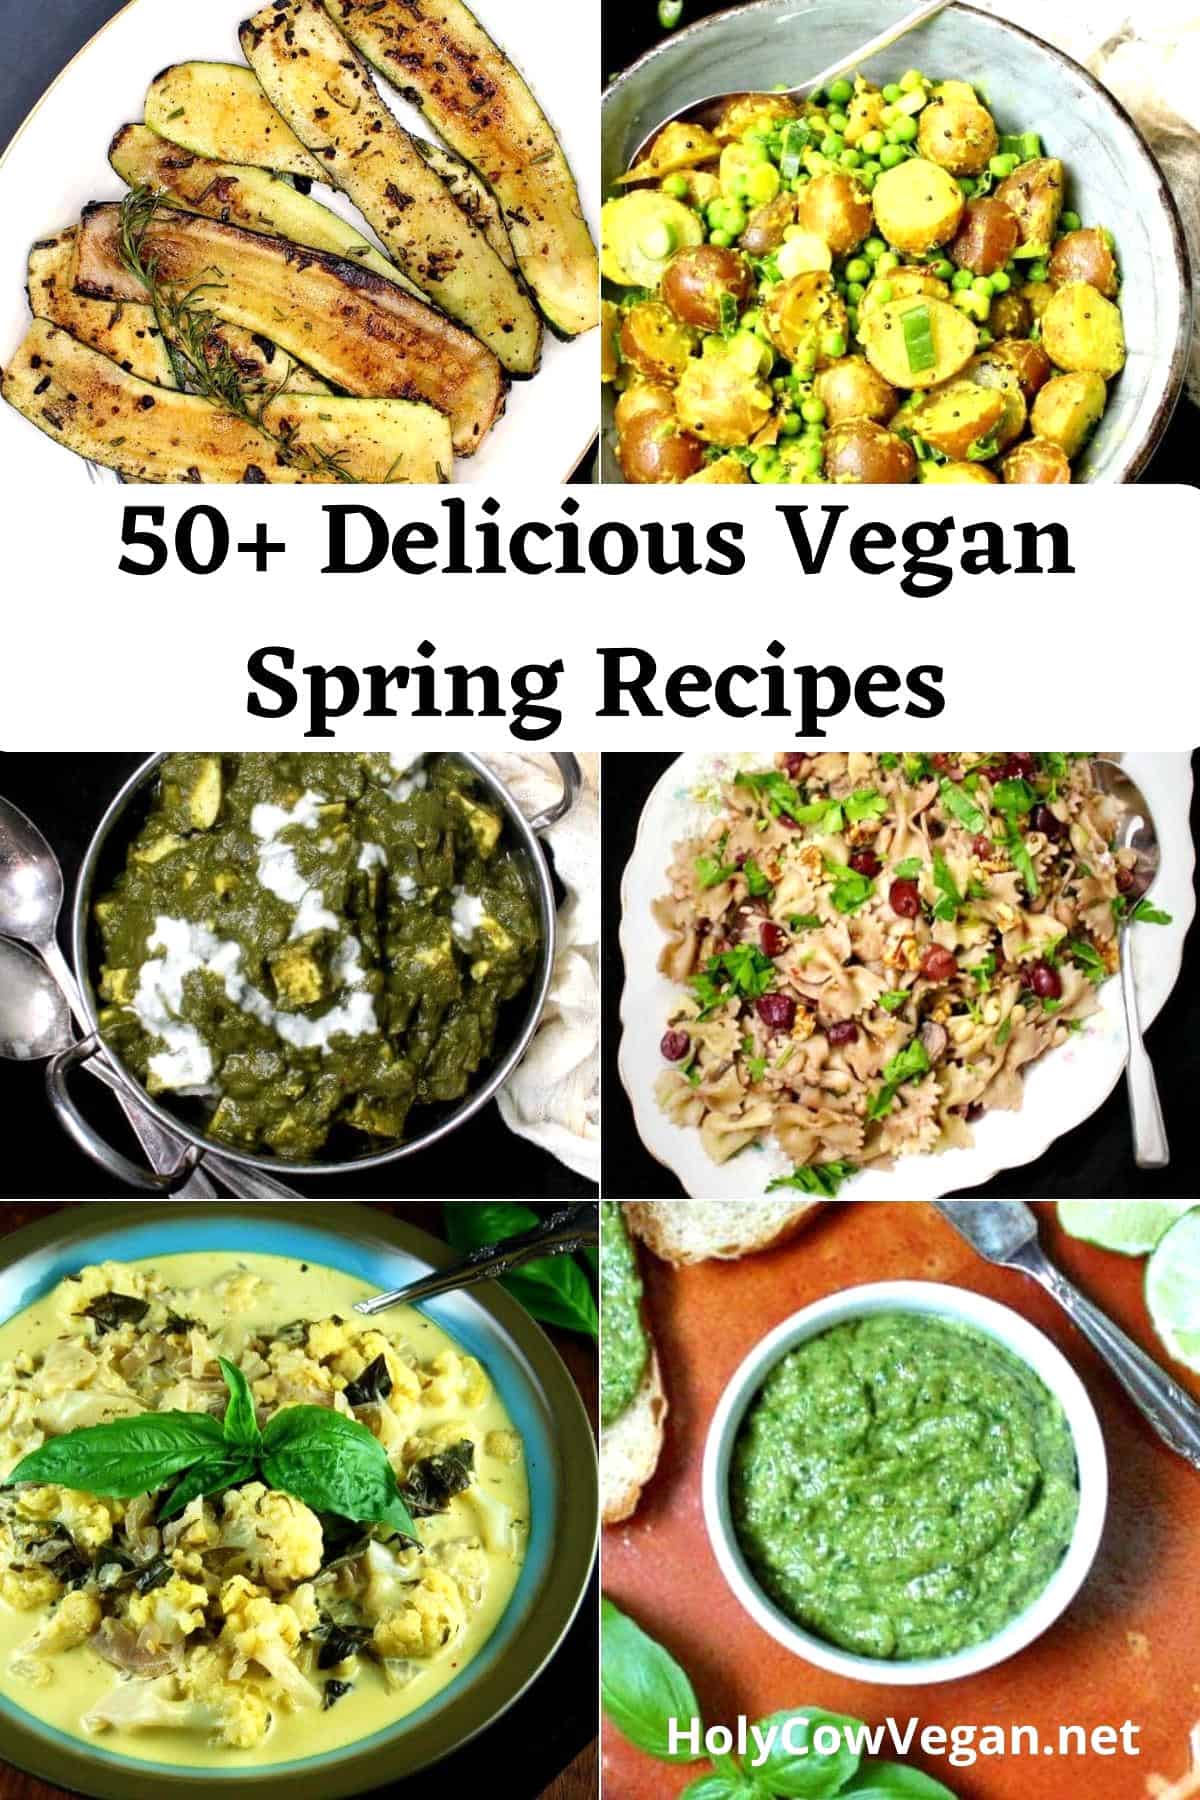 An image showing six vegan spring recipes made with vegetables like zucchini, new potatoes, peas, spinach, dandelion greens and basil.